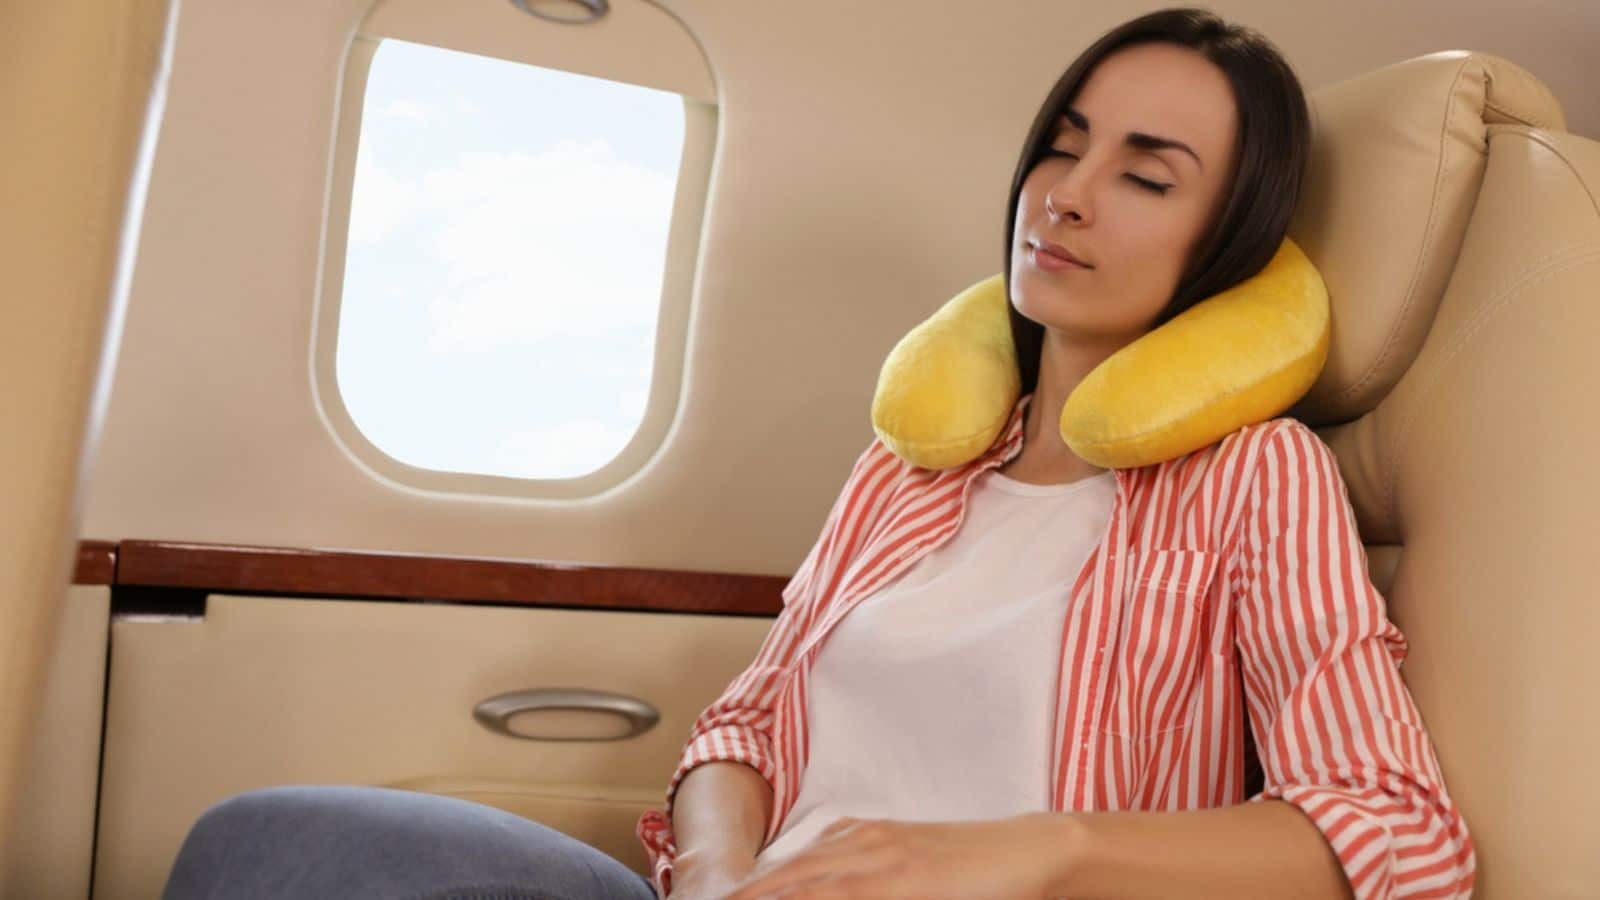 <p>Perhaps the one thing you need on your holiday or business trip is your travel pillow. Not only does it support your neck, but it also prevents discomfort while you lie down. Find the one that is soft and firm and easy to pack. Travel pillows made from memory foam are very easy to find and quite comfortable.</p>